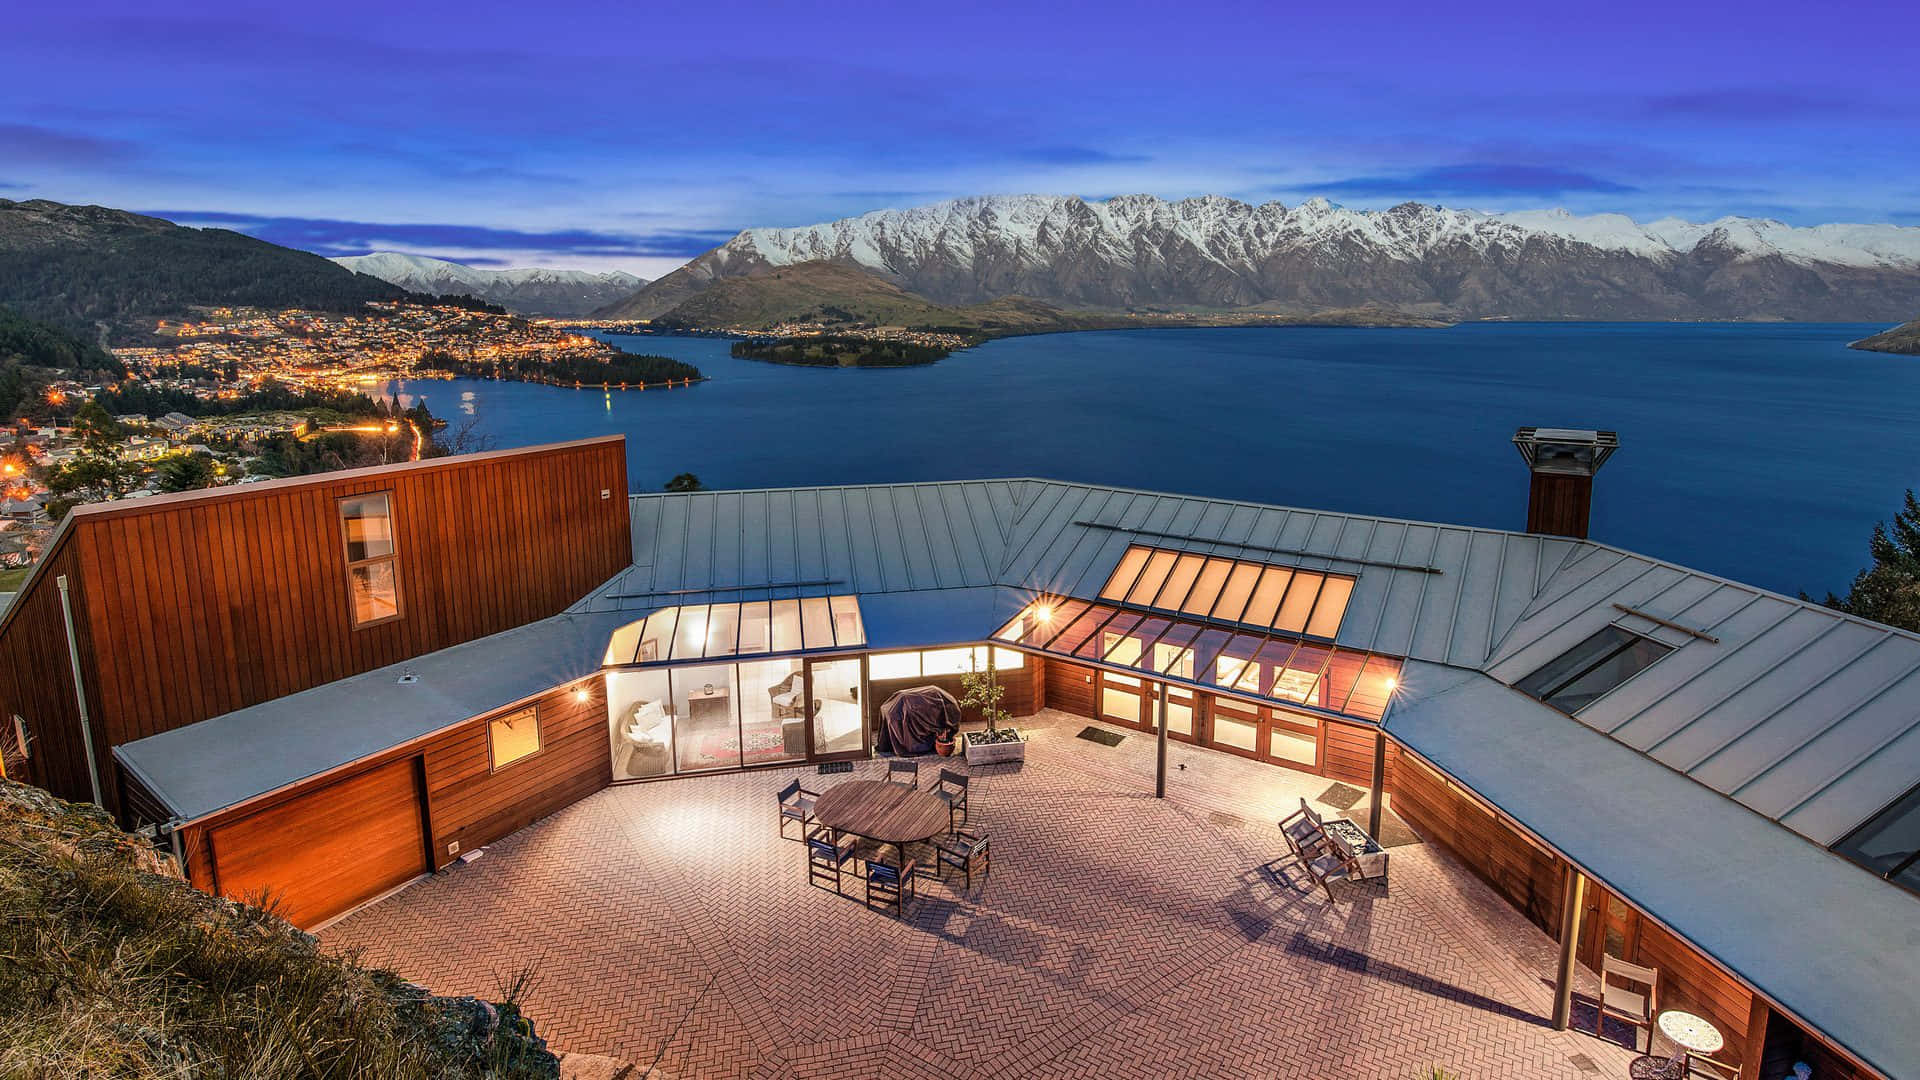 Queenstown Luxury Home With Lake Views Wallpaper